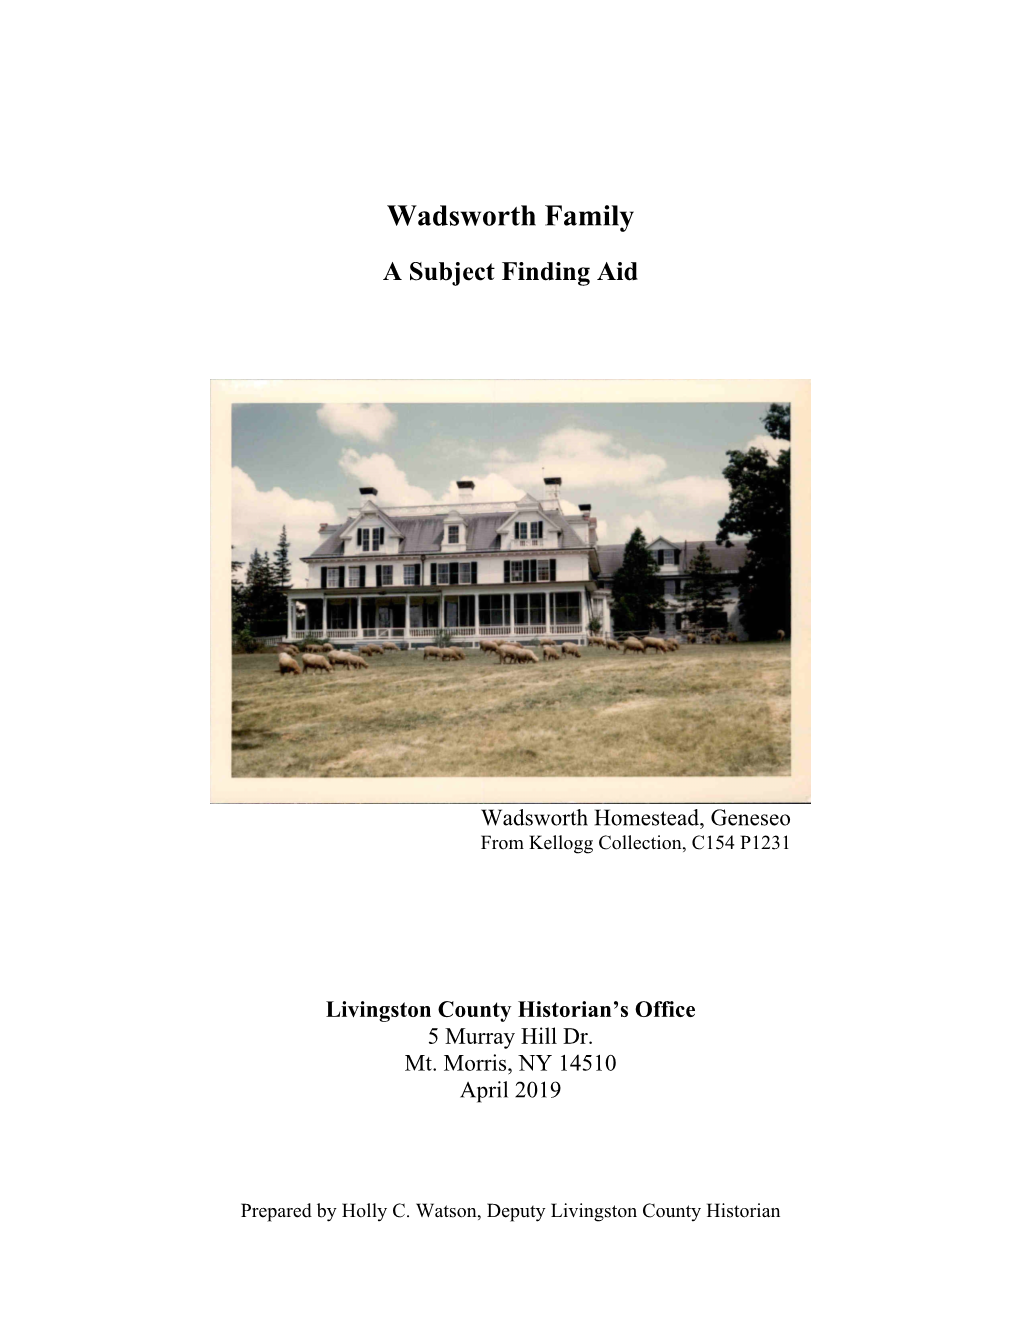 Wadsworth Family Finding